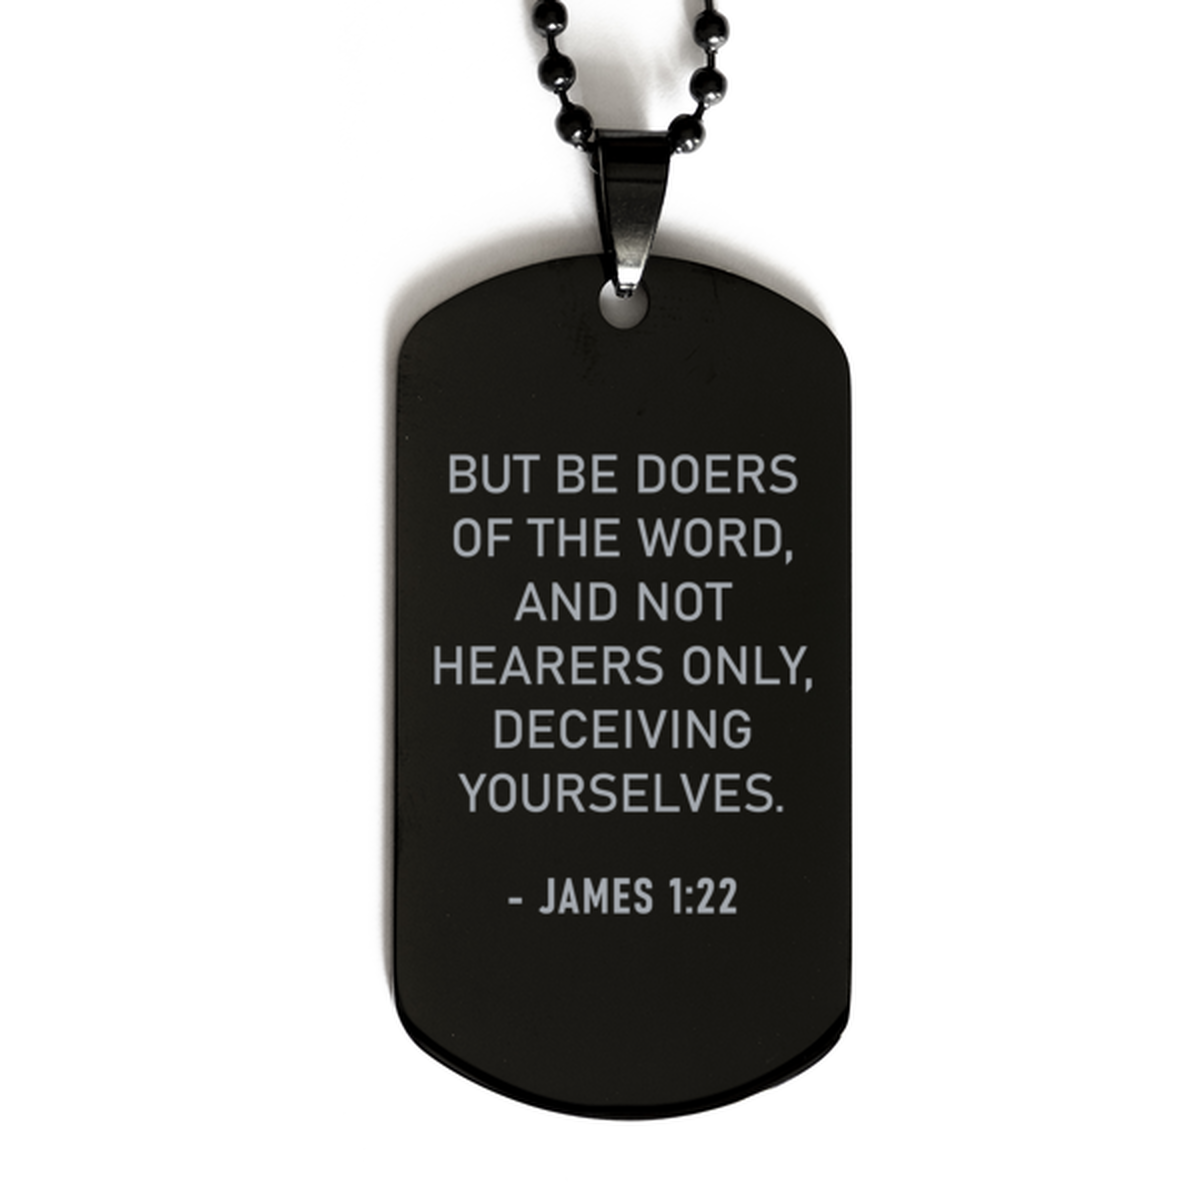 Bible Verse Black Dog Tag, James 1:22 But Be Doers Of The Word, And Not Hearers Only, Christian Inspirational Necklace Gifts For Men Women